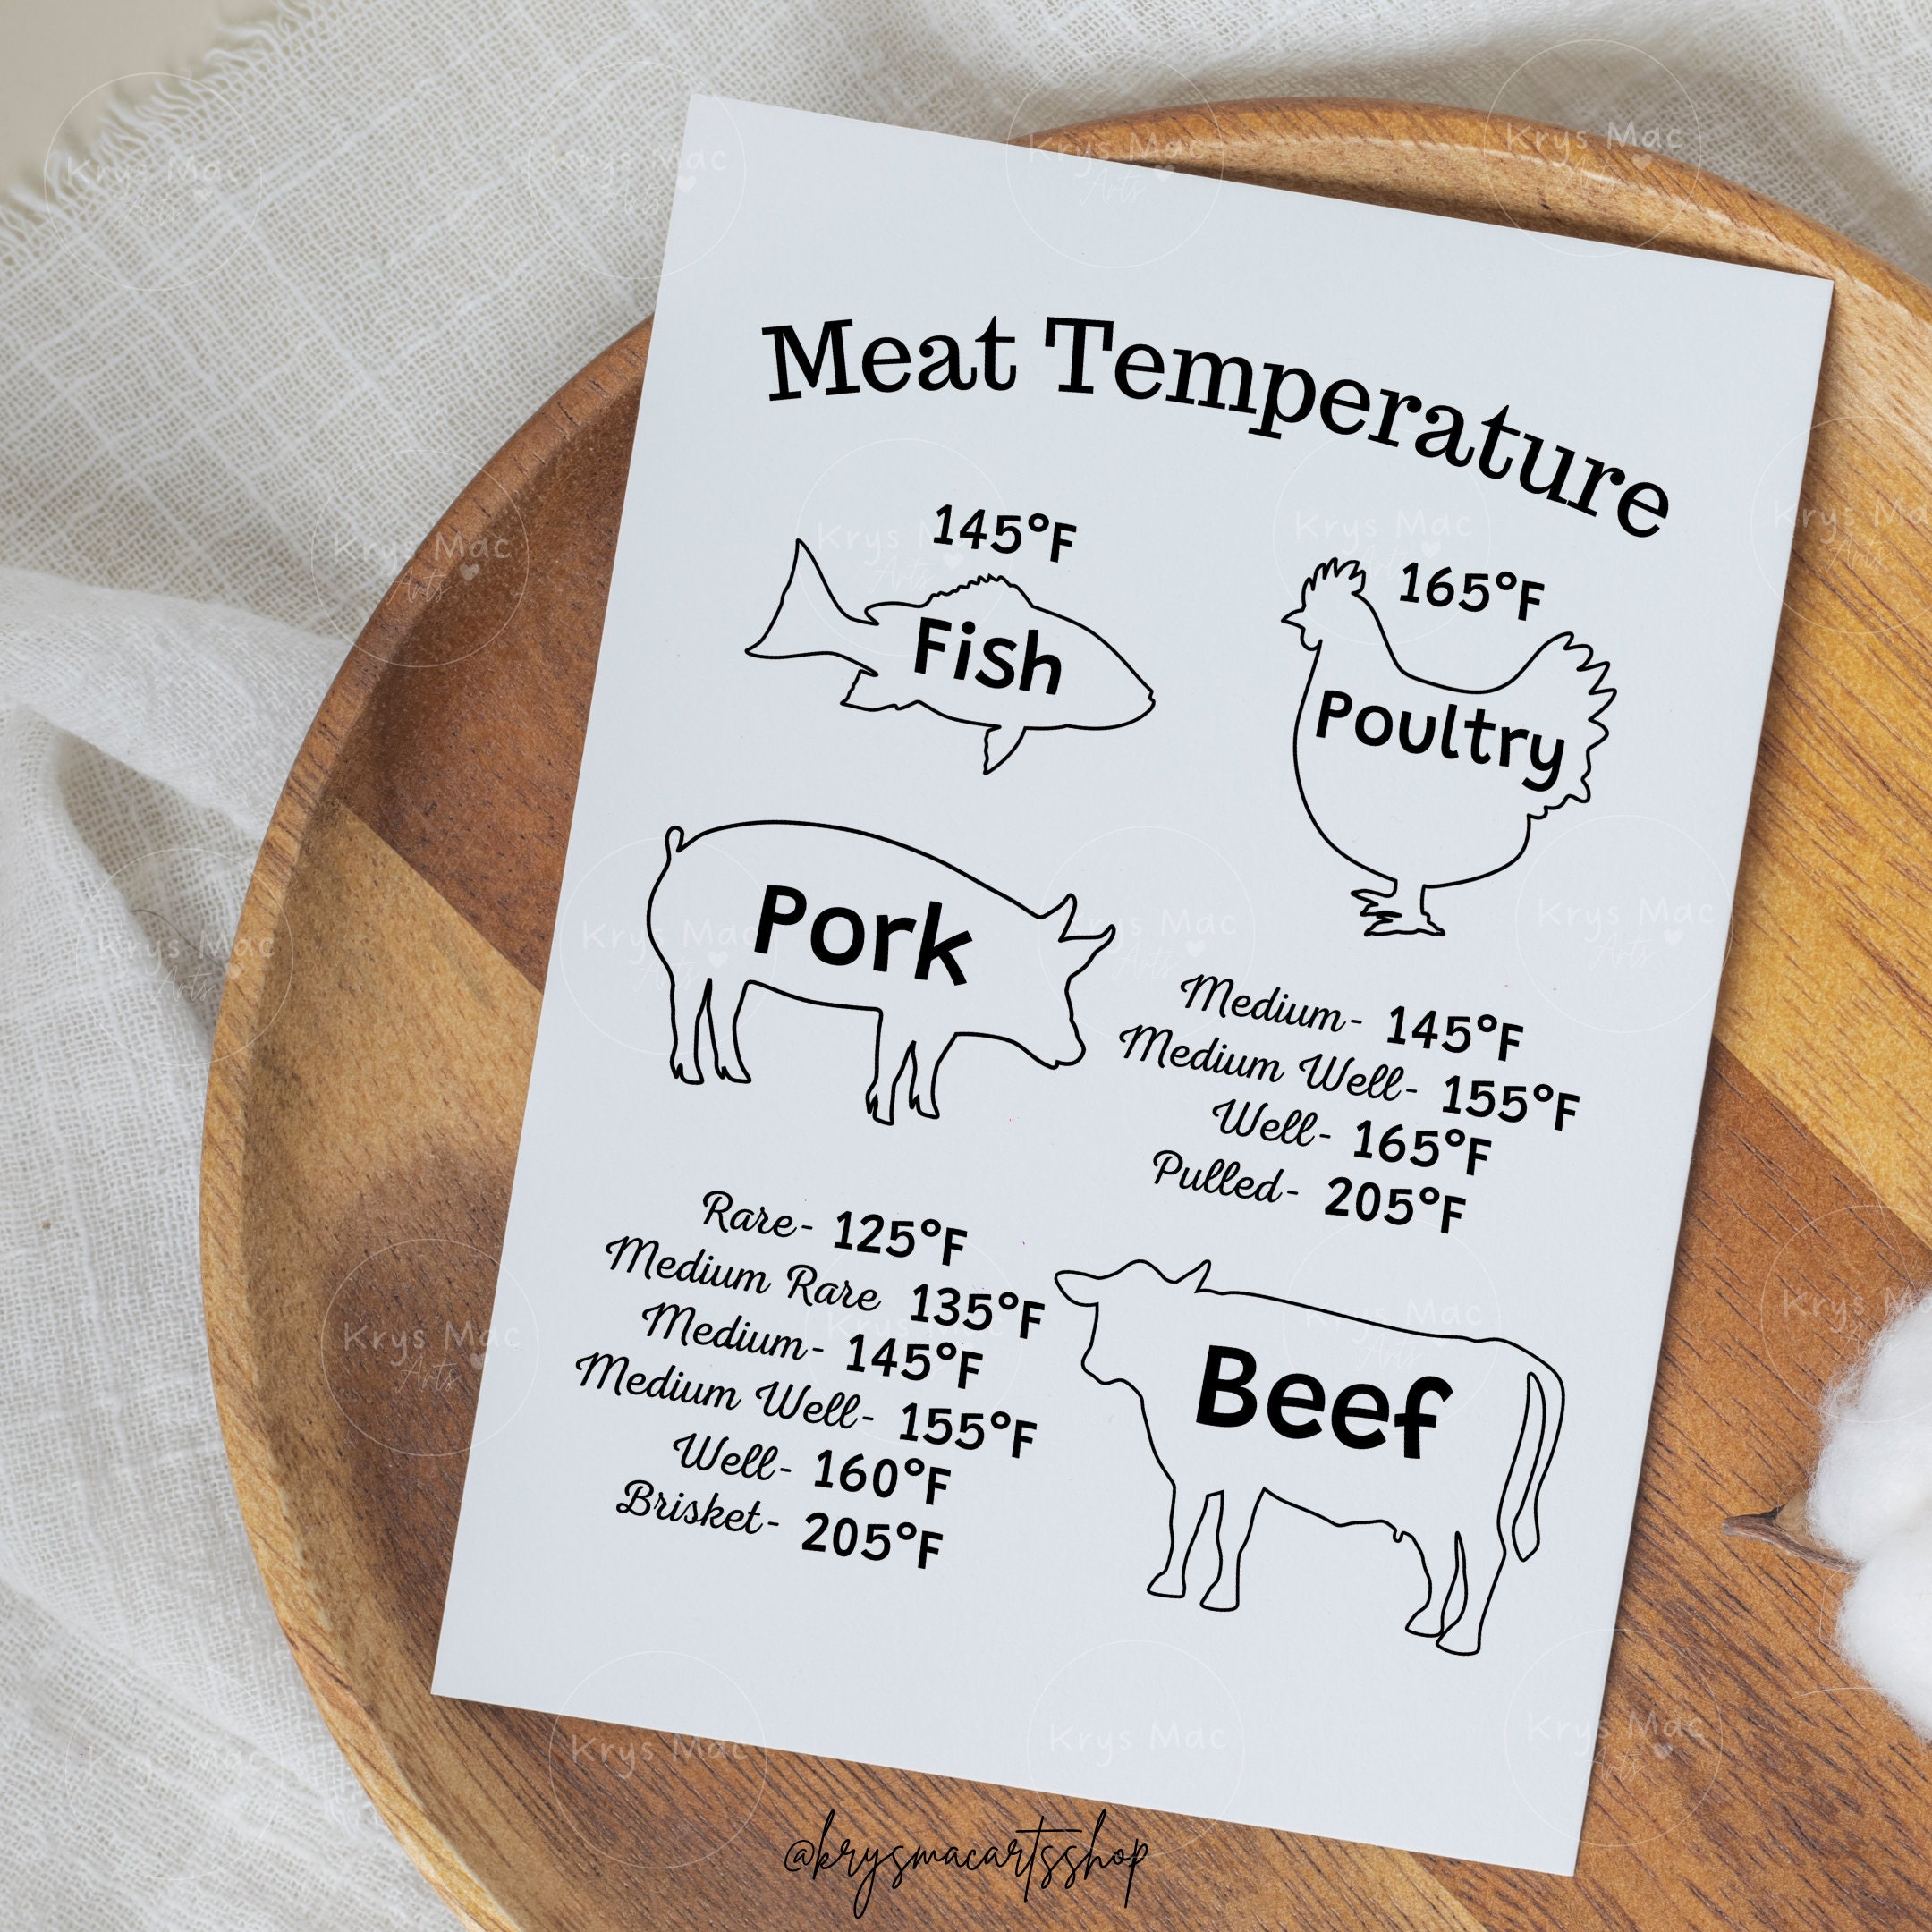 Kitchen Cooking Temperatures Chart Graphic by GraphicHouseDesign